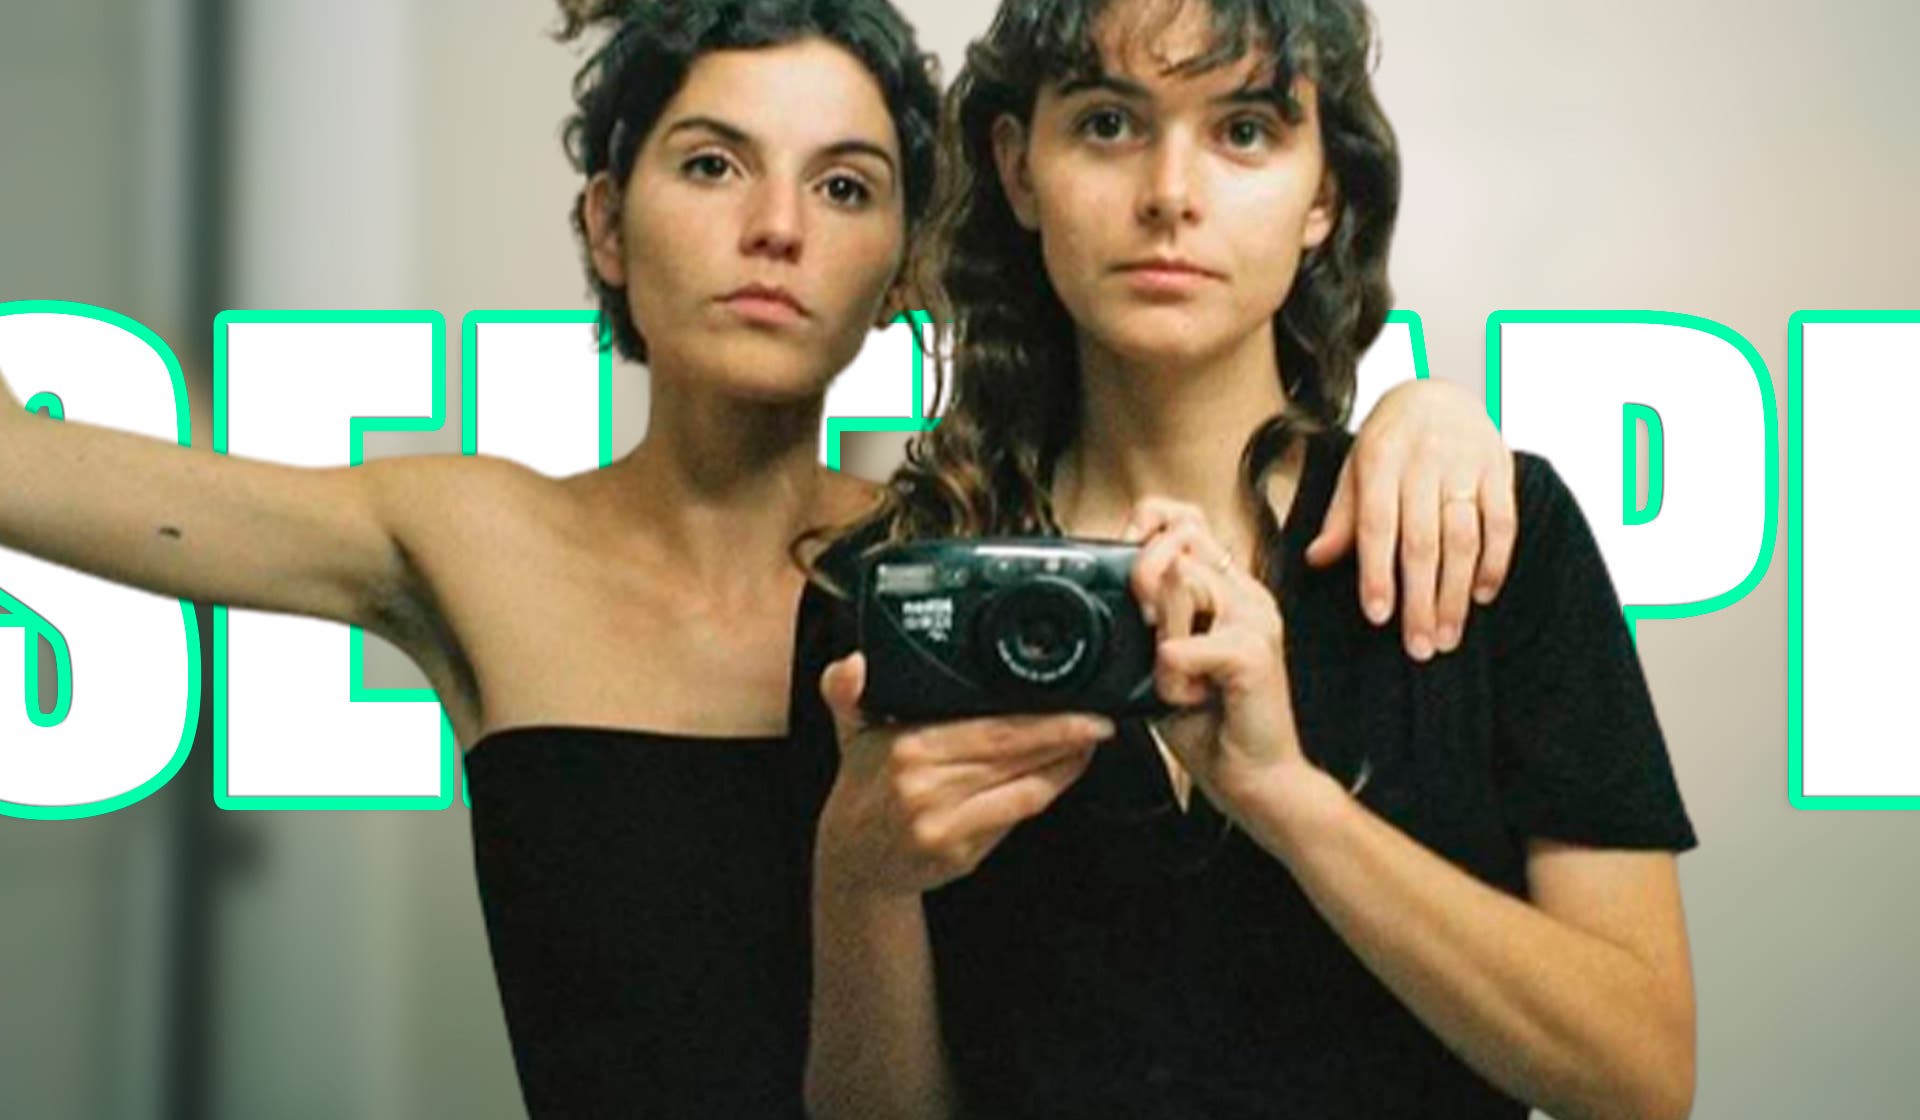 Interview with Joana and Mireia Vilapuig for Selftape: “everything that happens in Selftape is linked to a real experience”